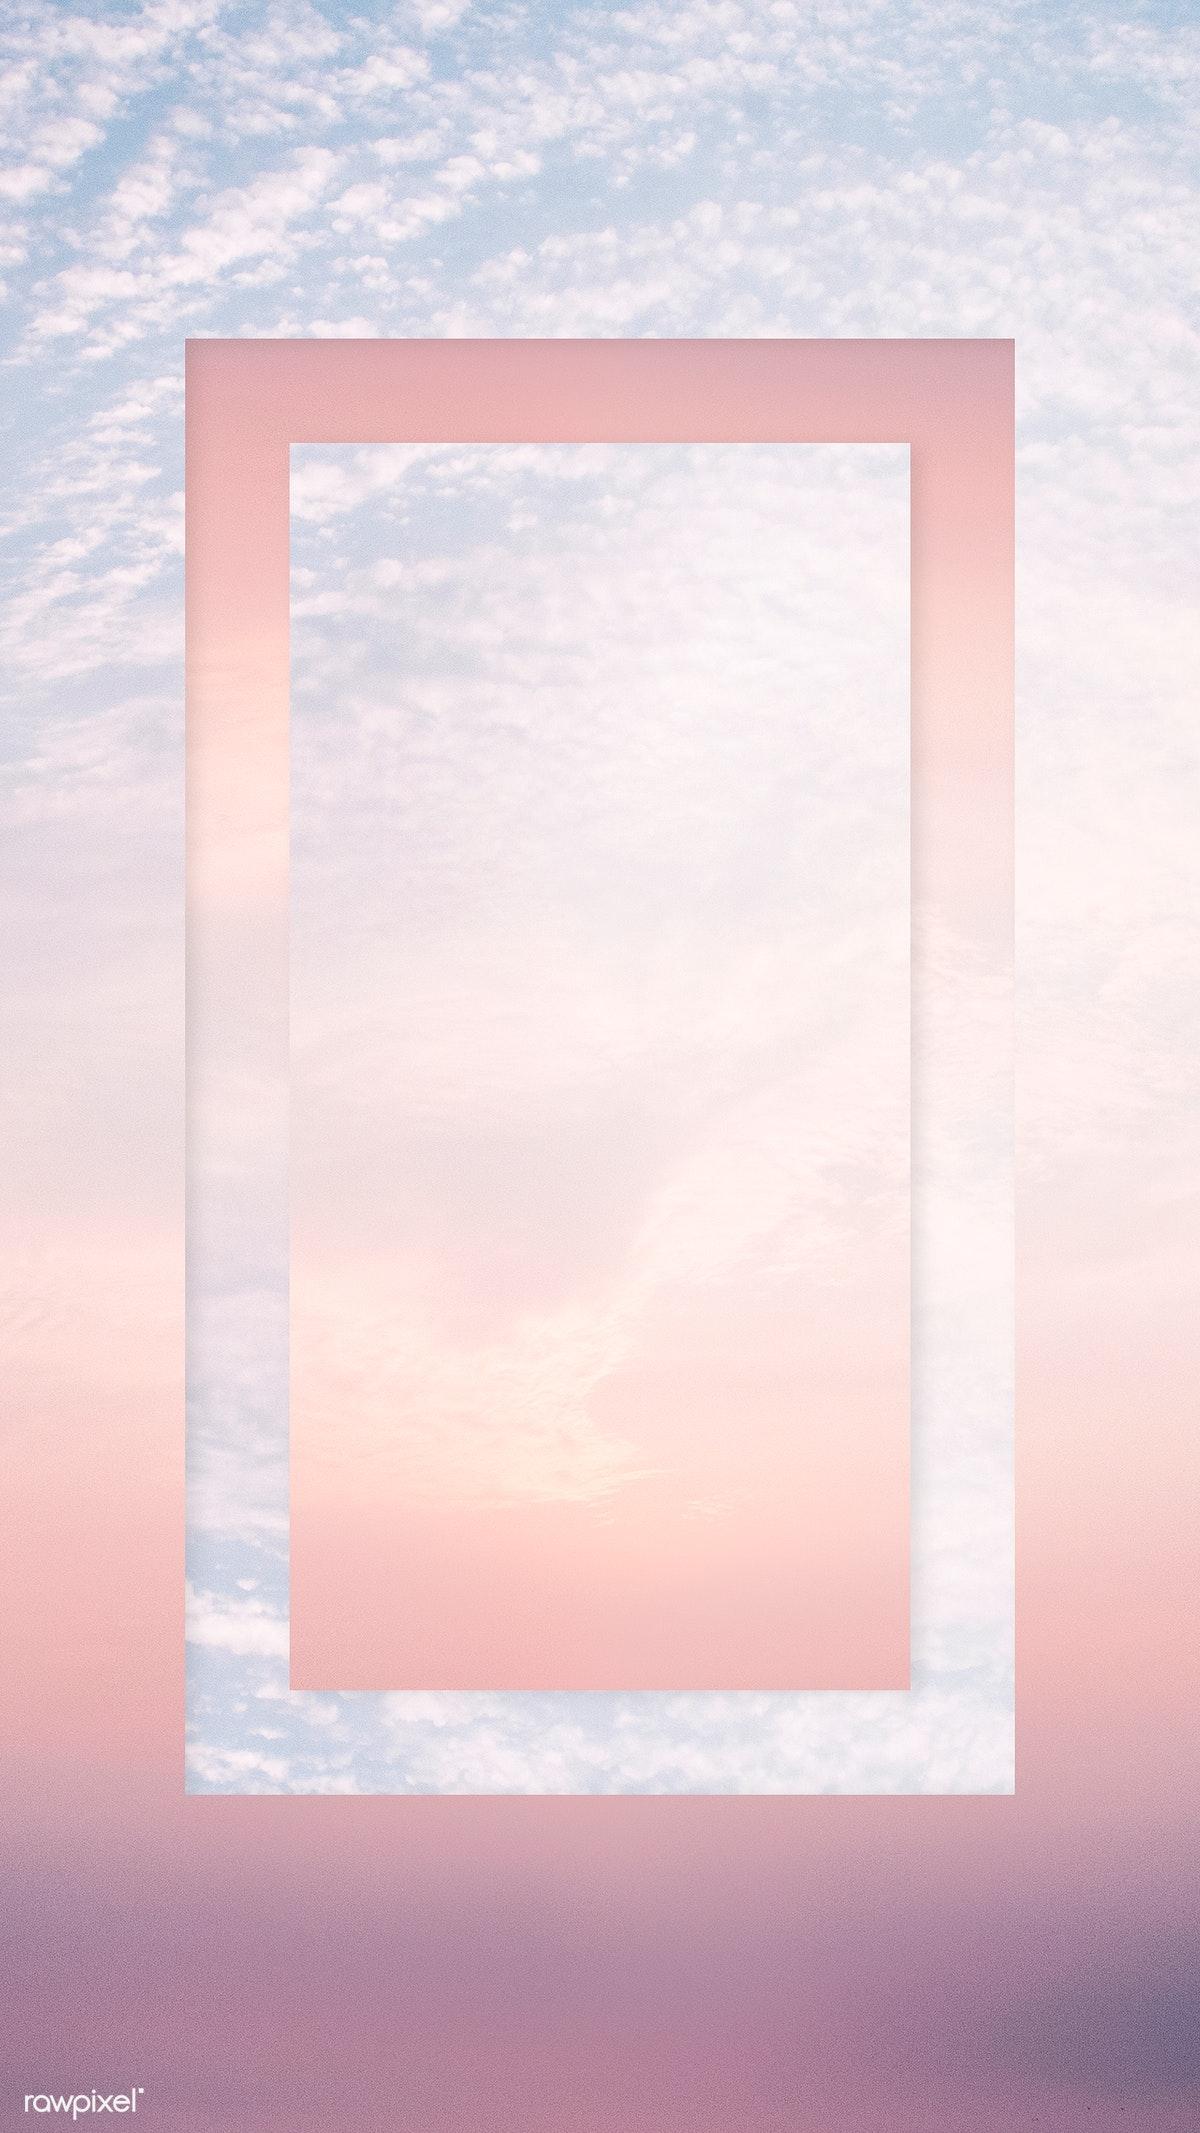 Download premium image of Cotton candy sky with a rectangle frame mobile